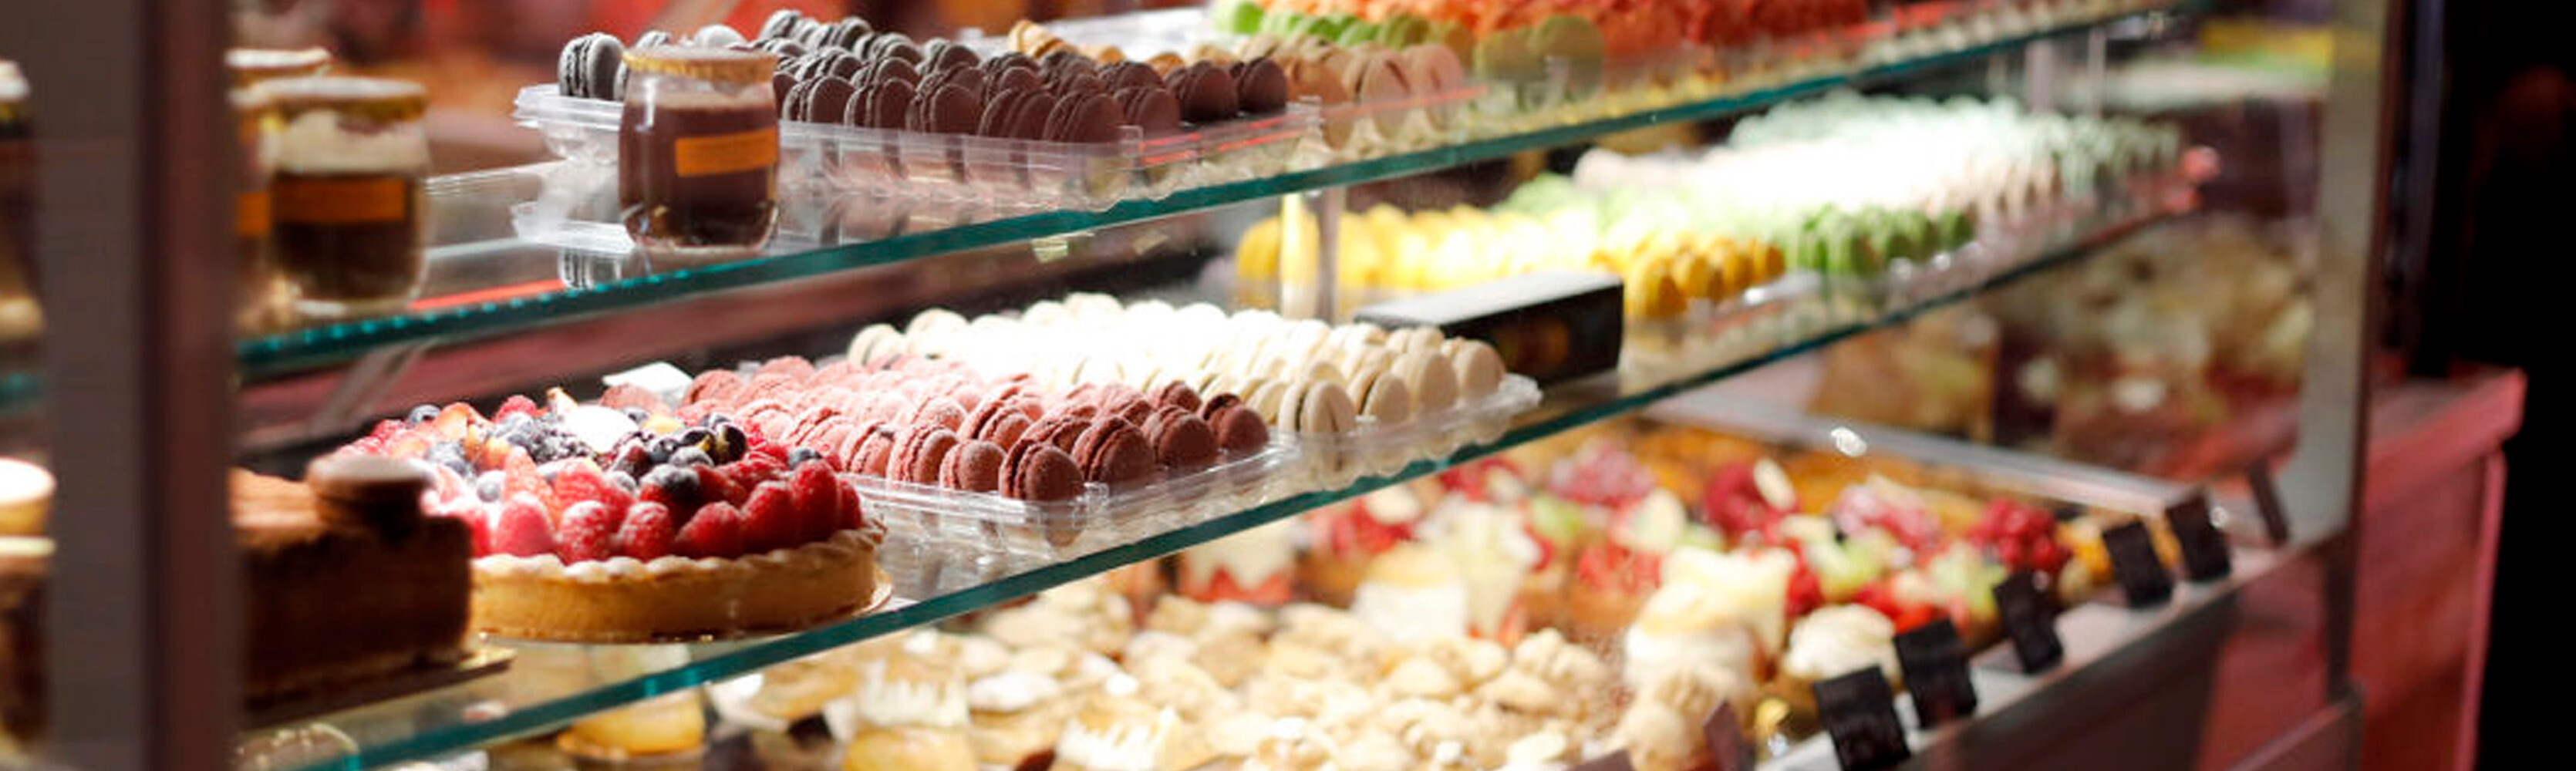 A photo of the bakery display case at Ettore's.